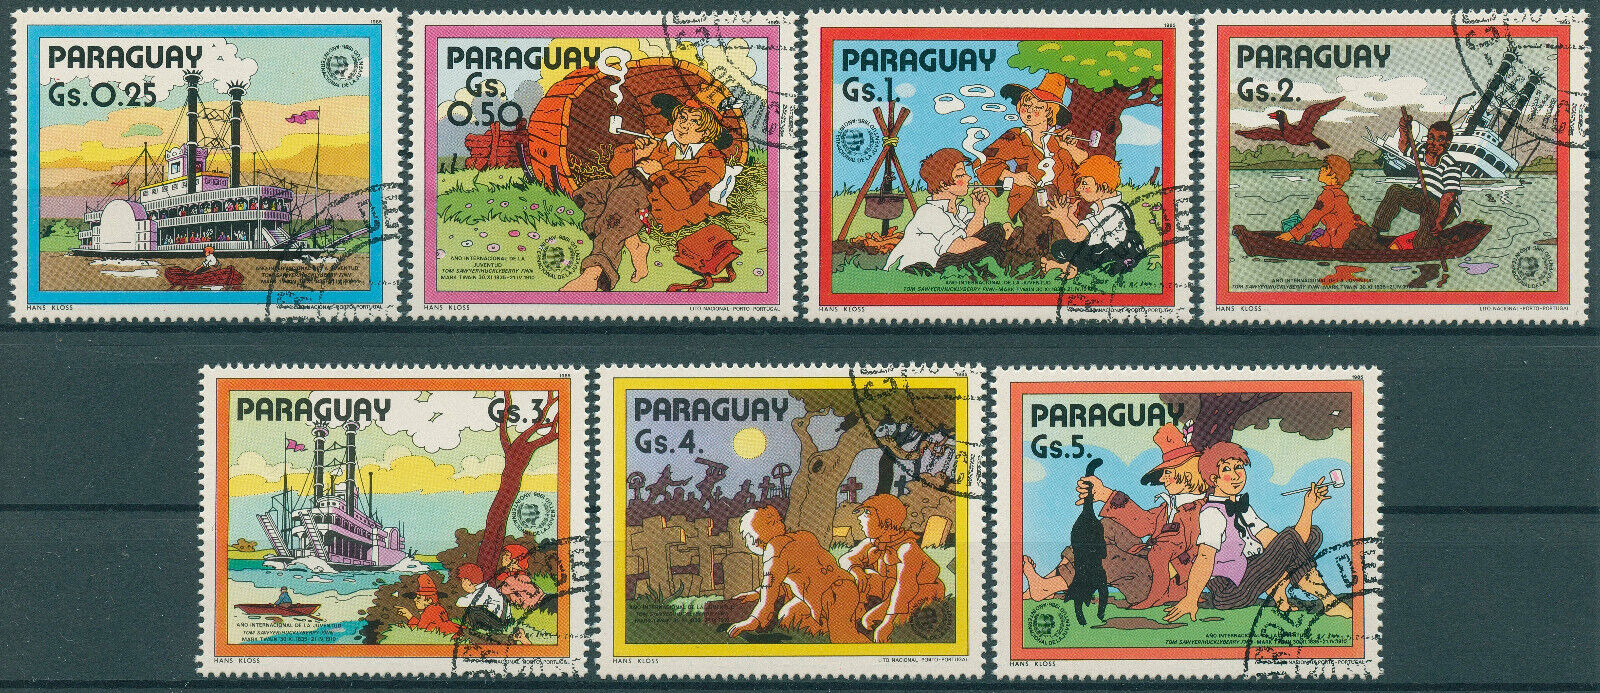 Paraguay 1985 CTO Writers Stamps Intl Youth Year Mark Twain Ships 7v Set